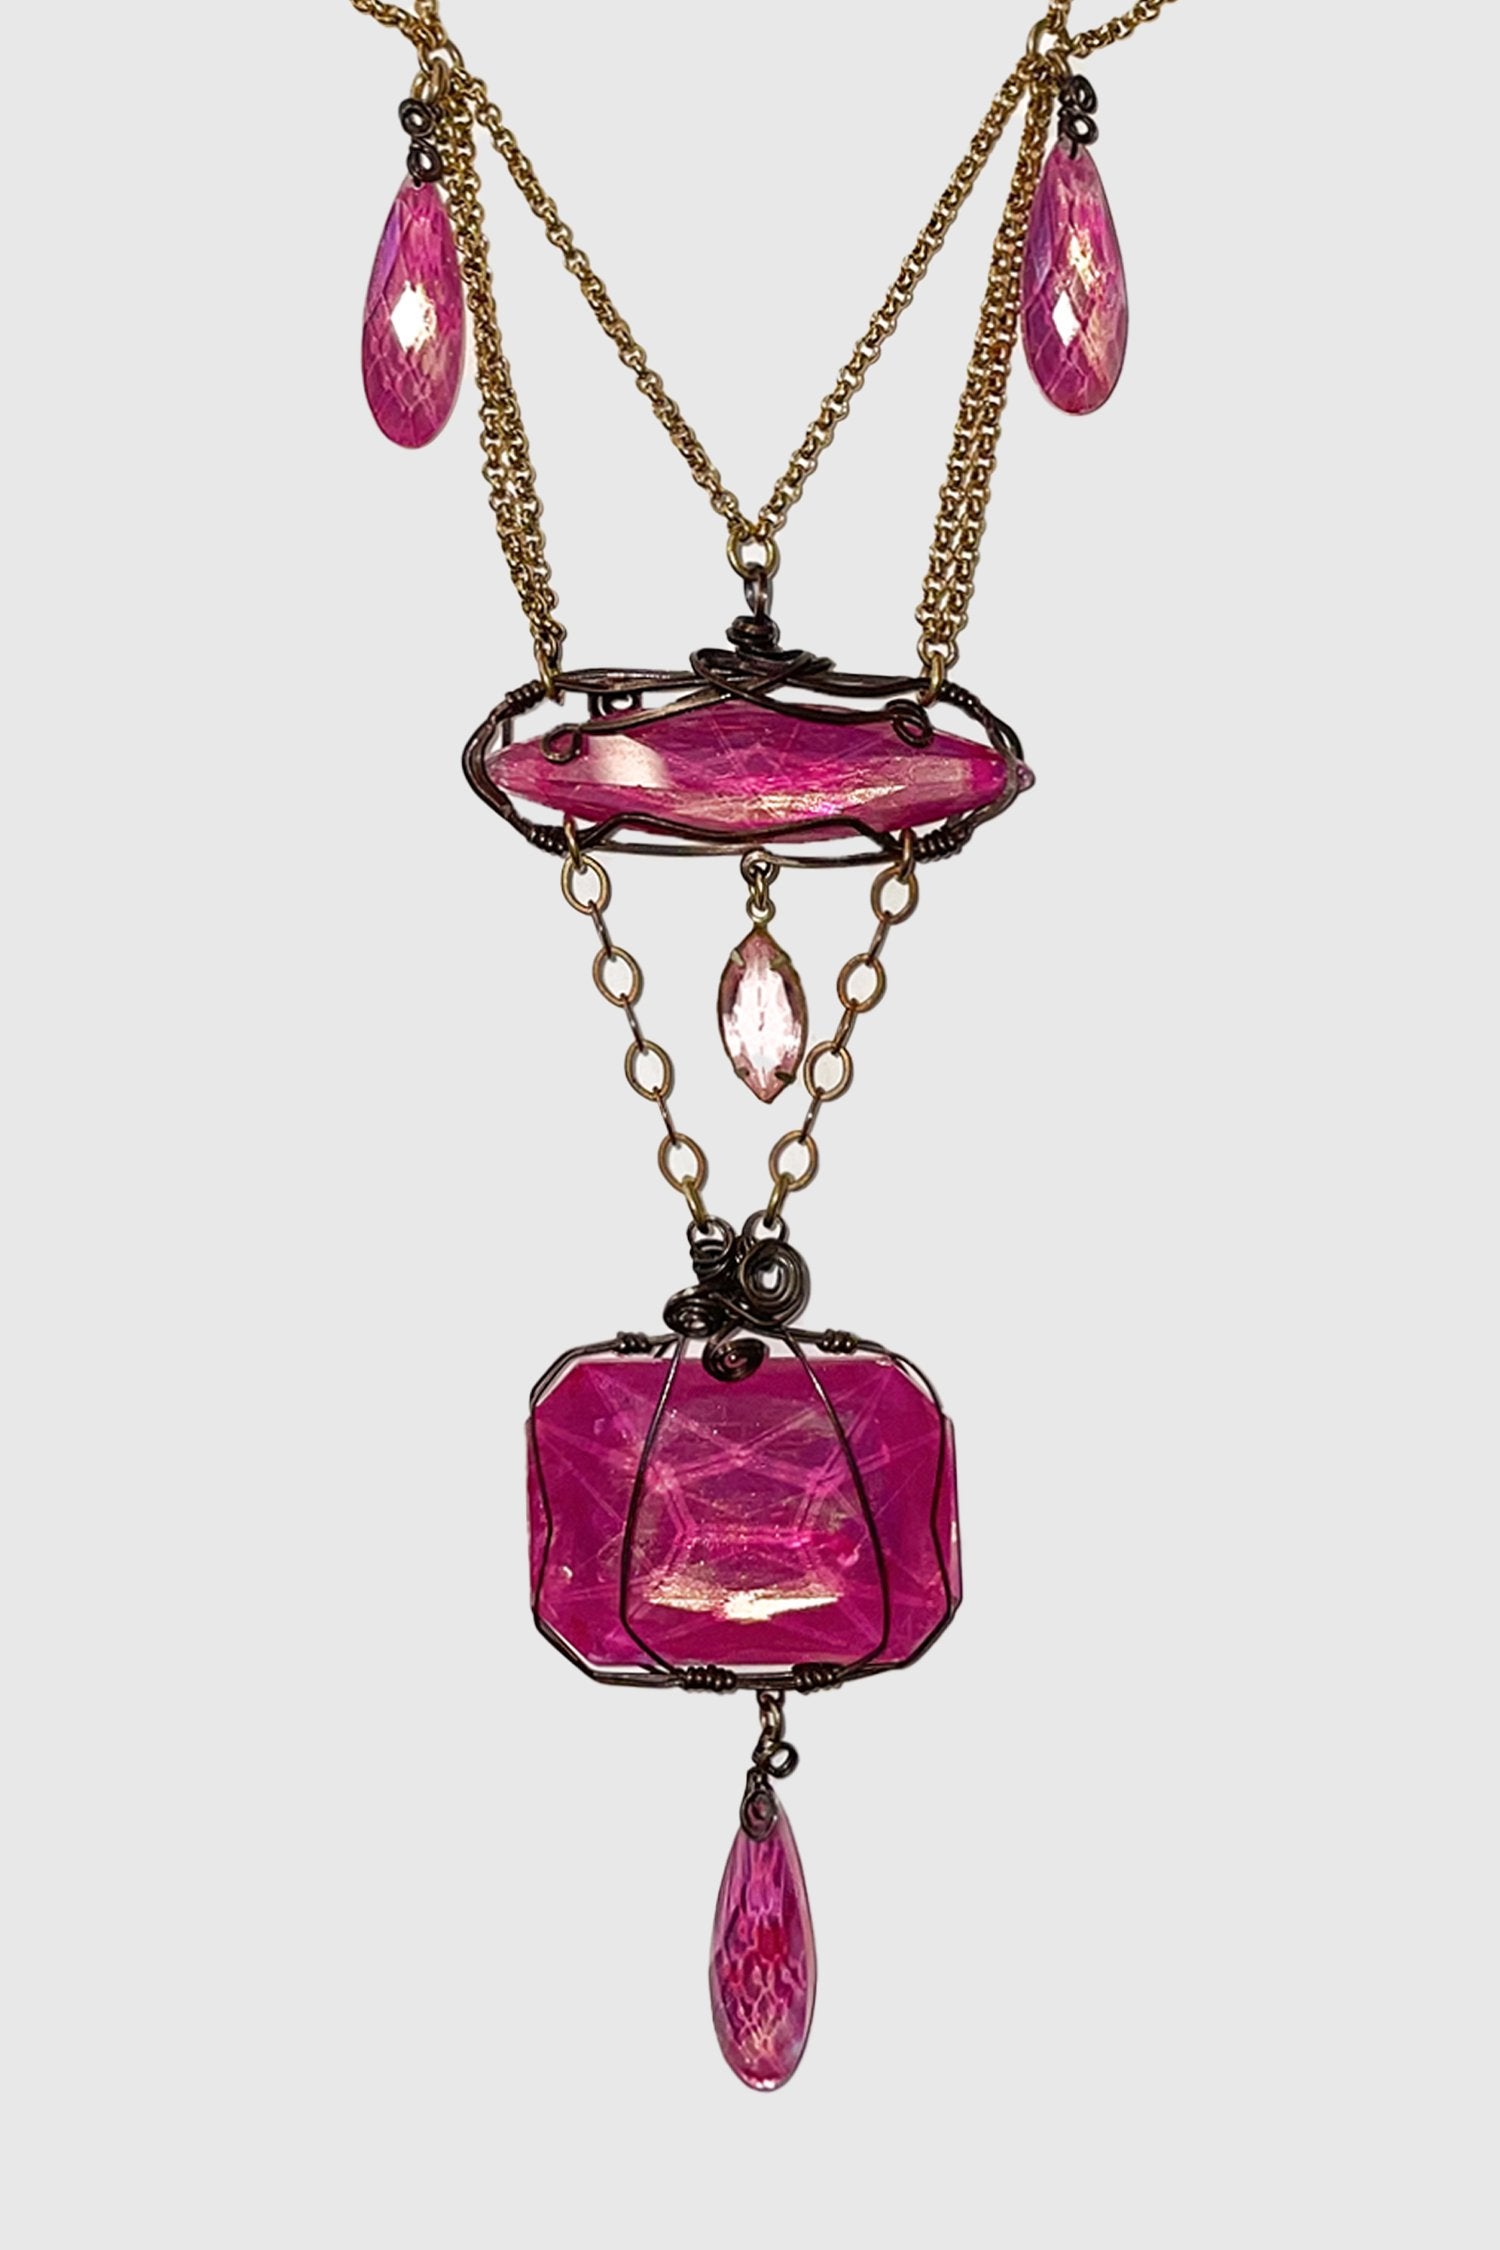 Beamon Teardrop Ruby Pendant, top 2-red stones, 1 oval, a squared, a tear drop, Gold-tone chain